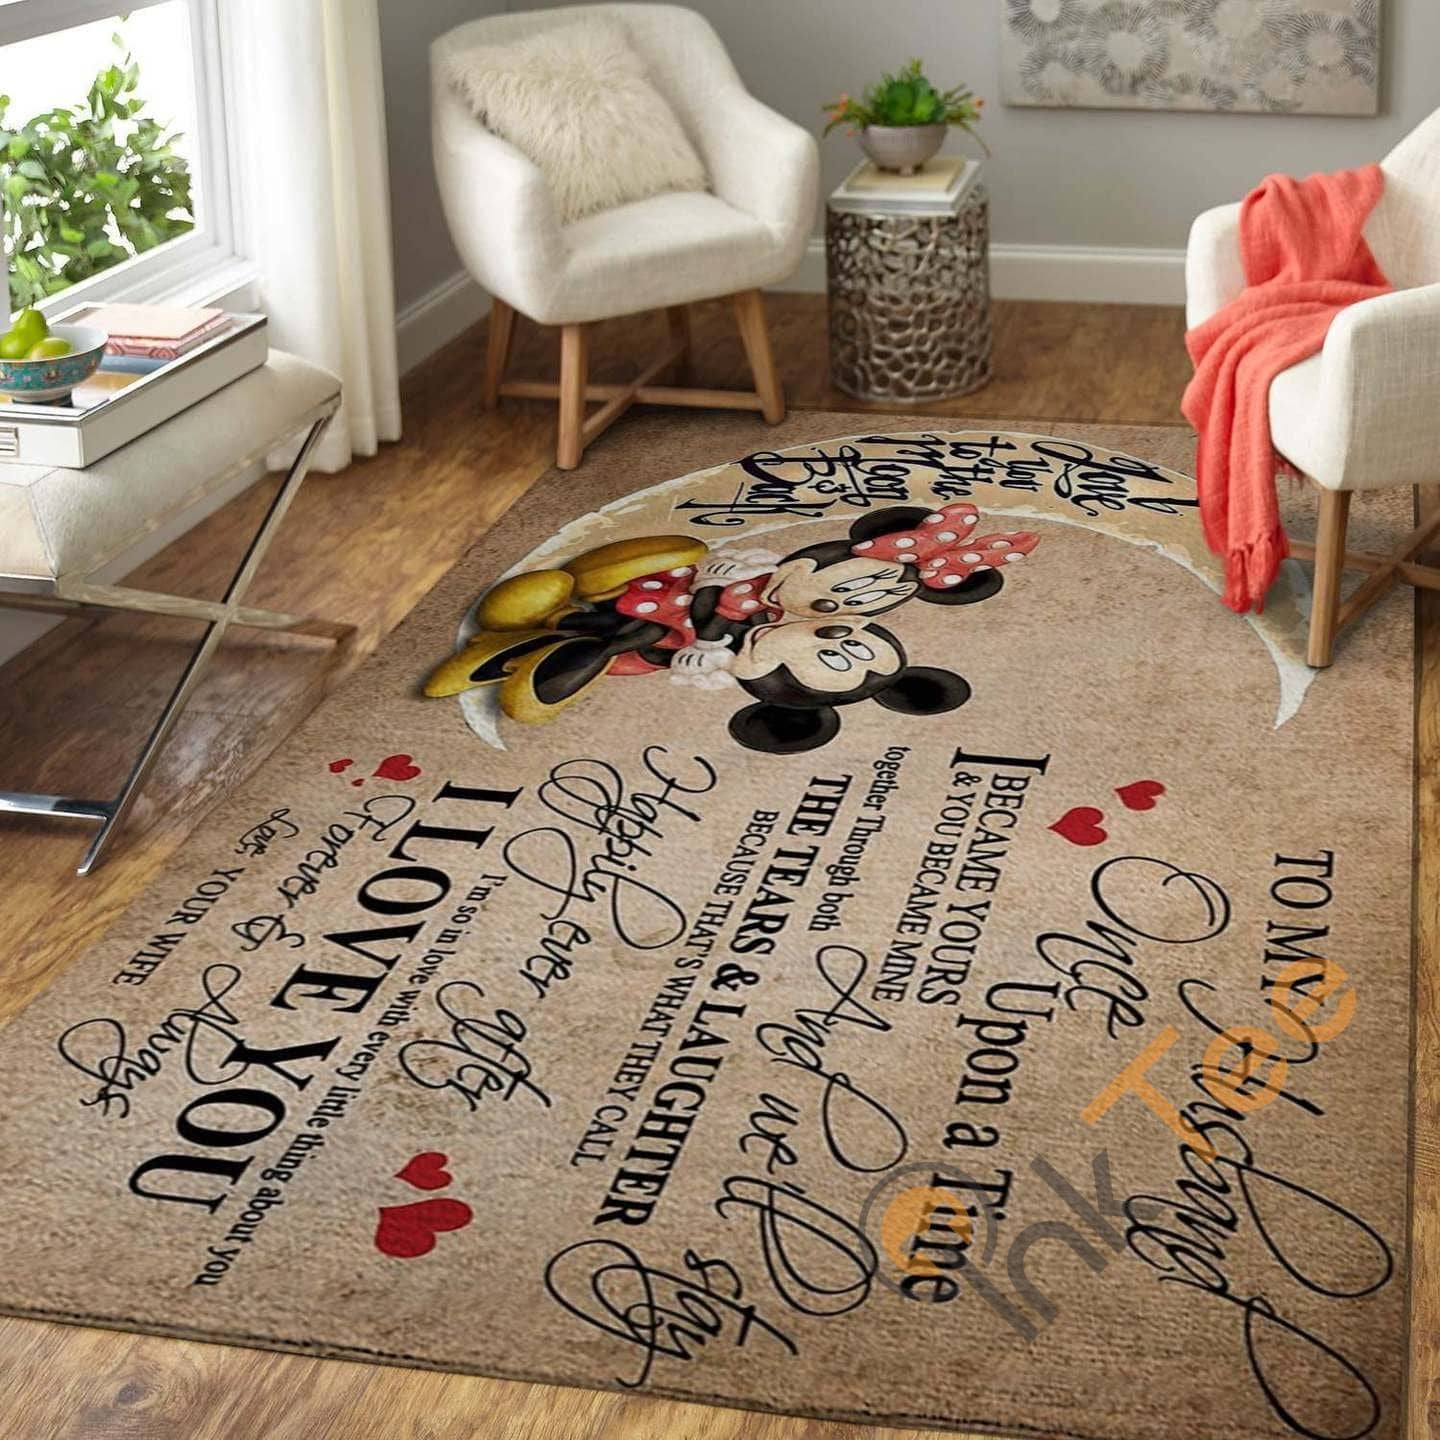 Mickey And Minne Mouse Disney Lover Movies Christmas Gift Floor Decor Rug